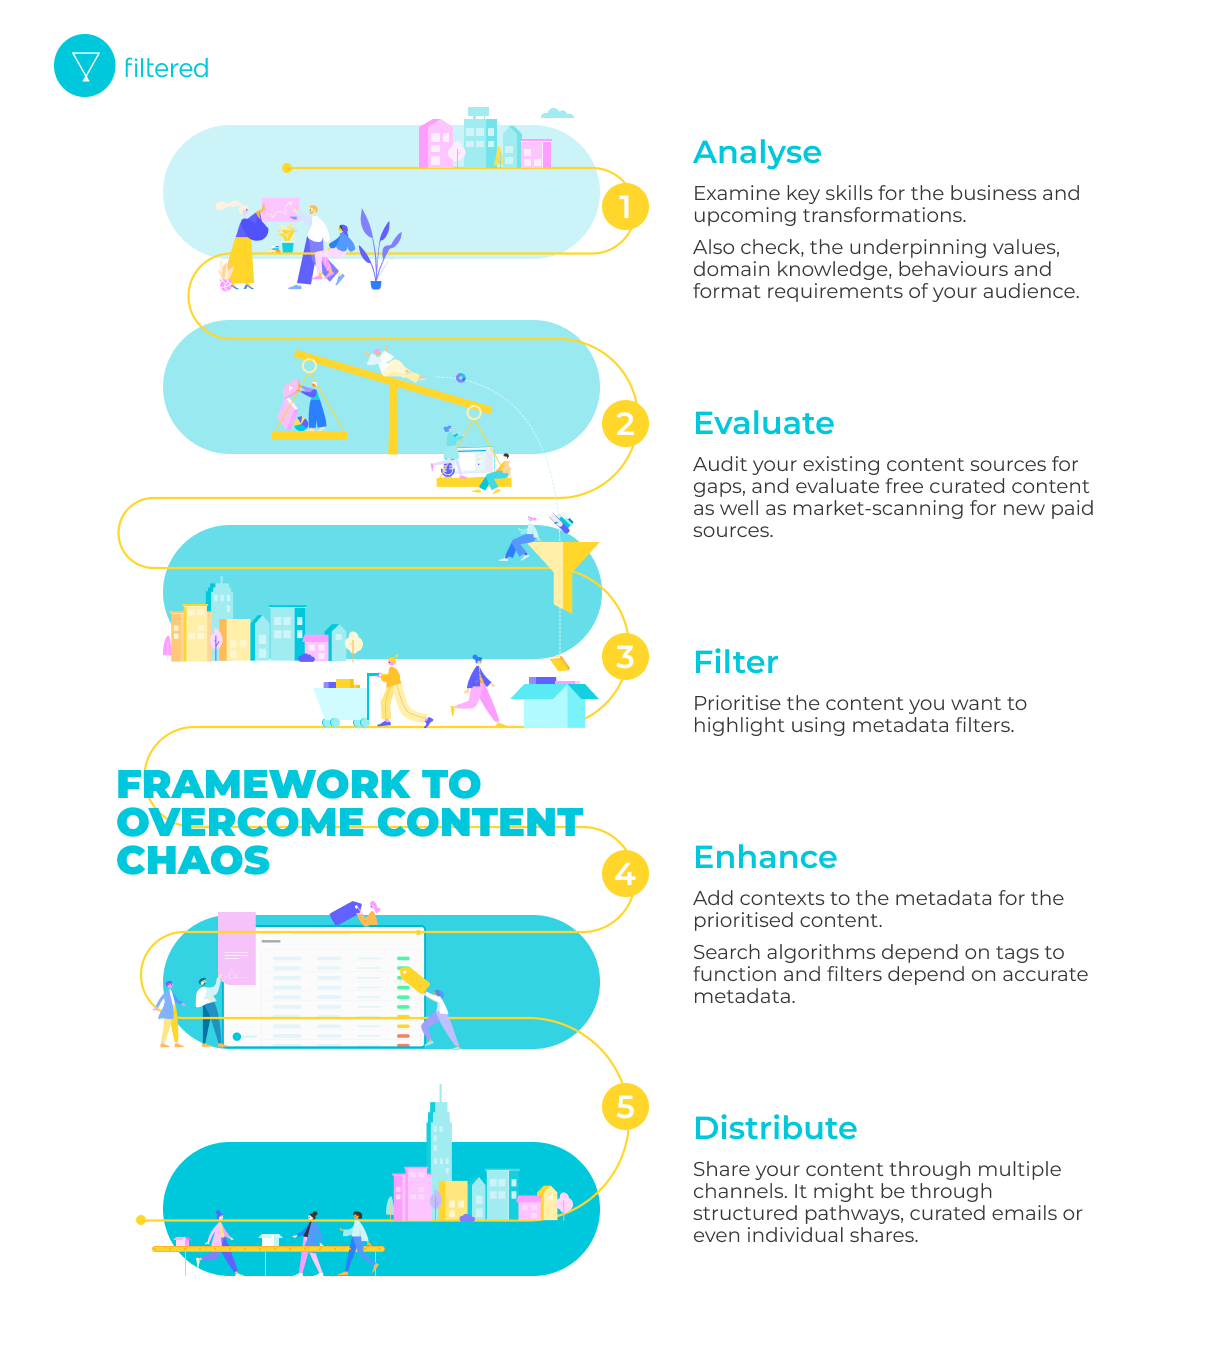 Framework to overcome Content Chaos